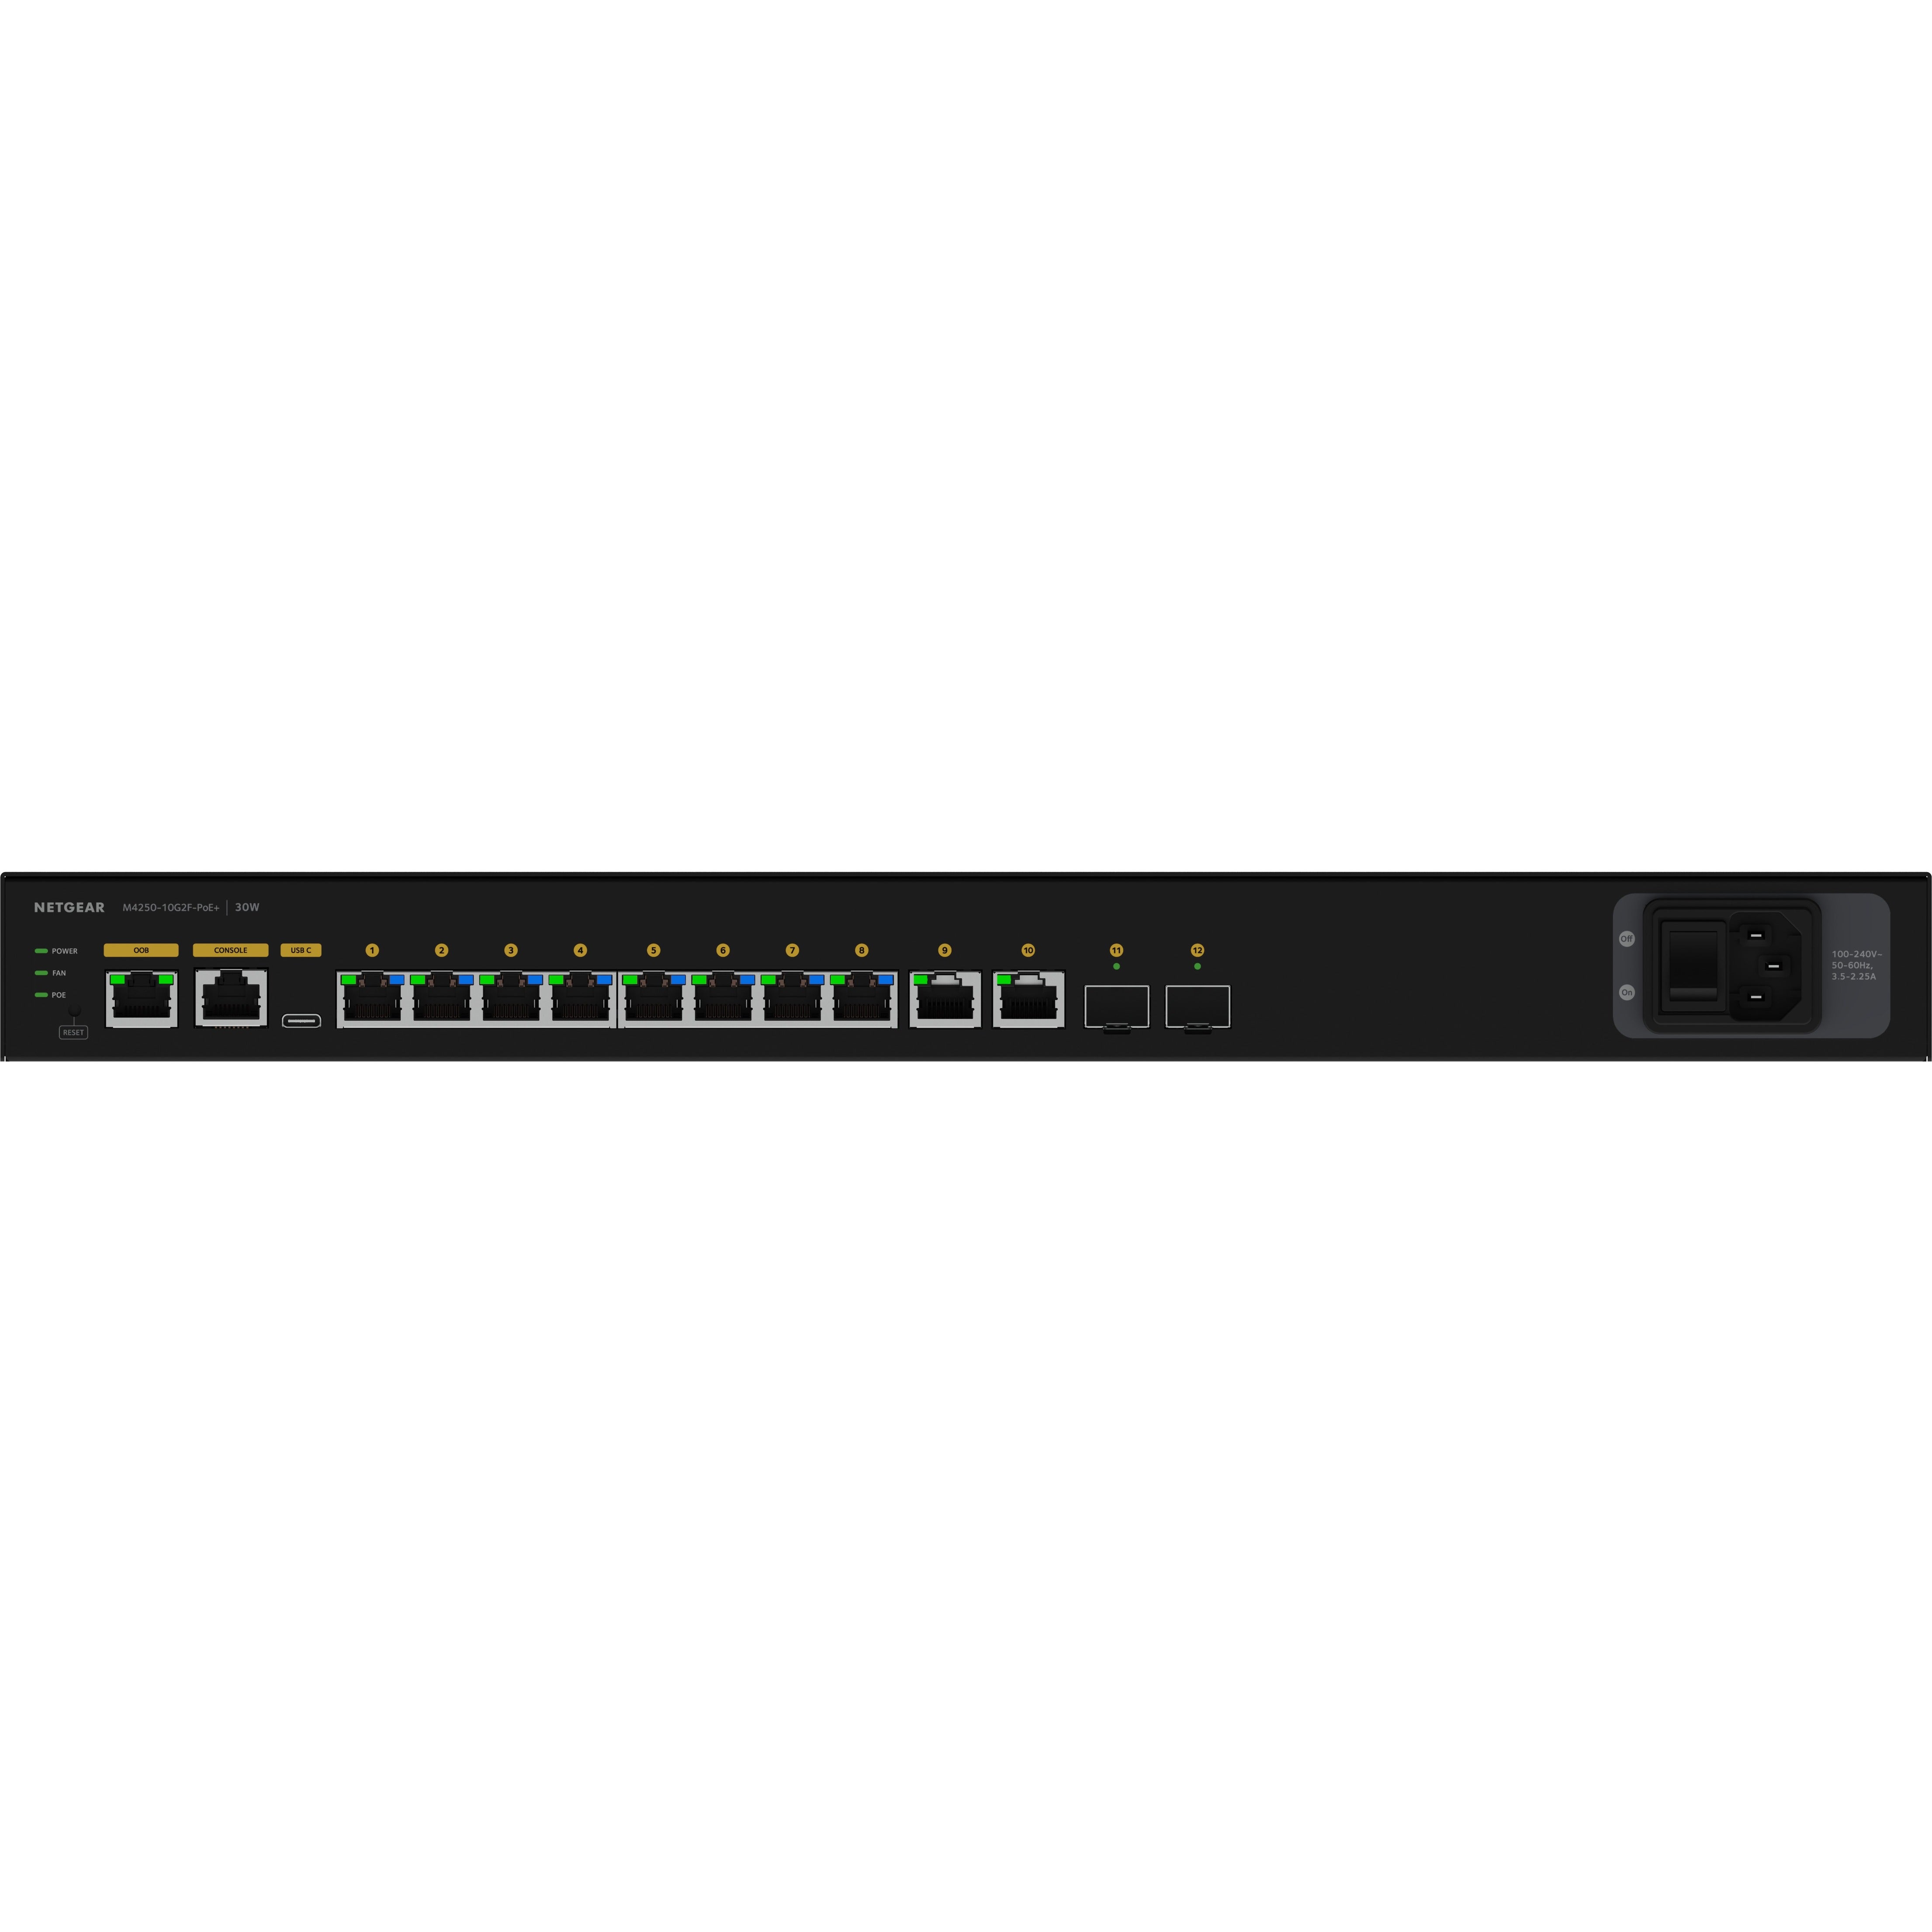 Netgear GSM4212P-100NAS AV Line M4250-10G2F-PoE+ 8x1G PoE+ 125W 2x1G and 2xSFP Managed Switch, Gigabit Ethernet, Rack-mountable